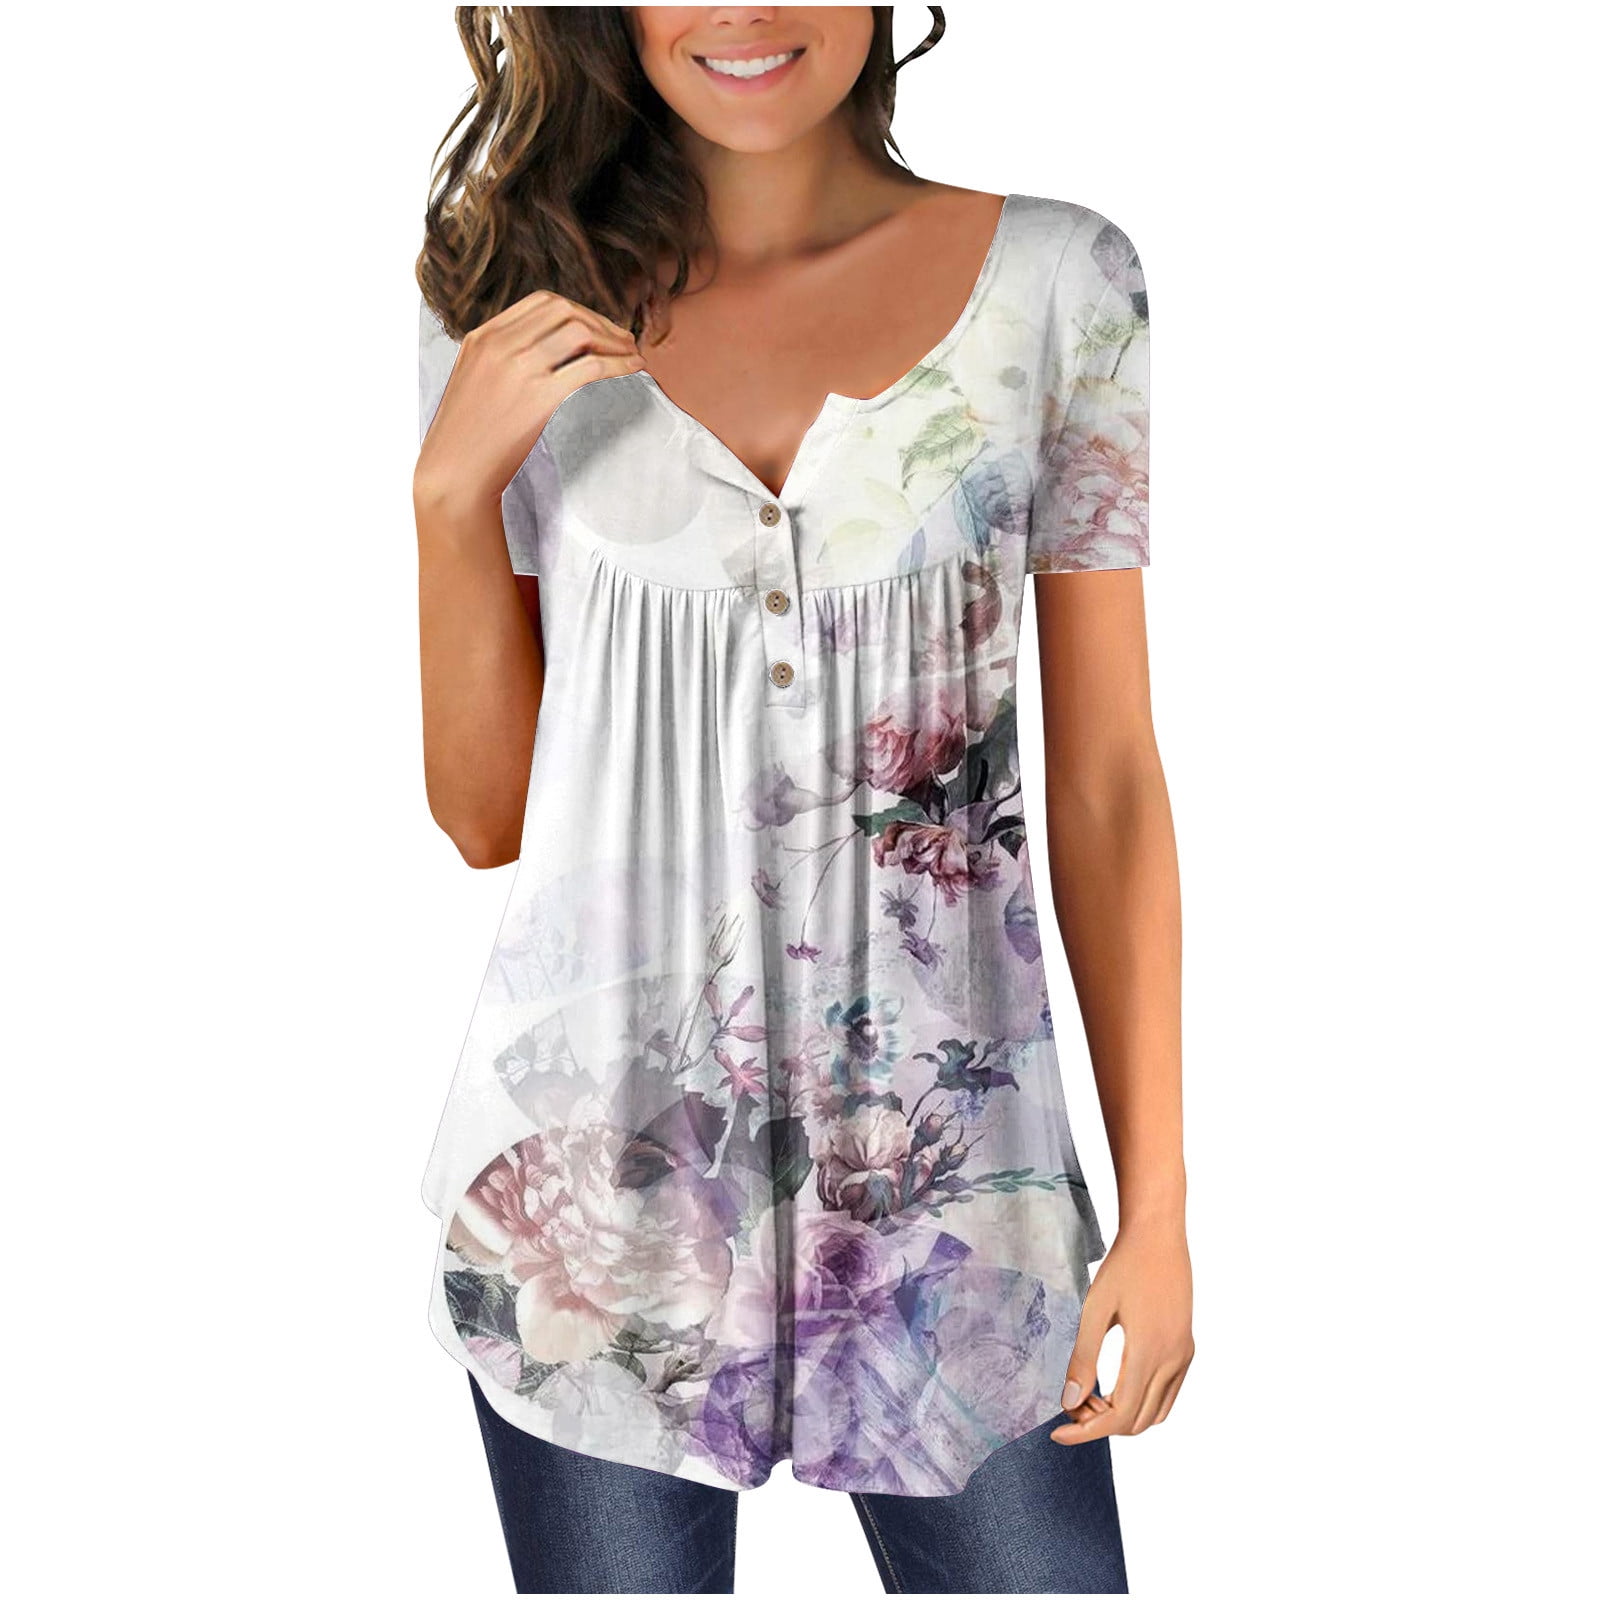 50% off Clear! YOTAMI Blouses for Women Clearance $5 Floral Print Tops ...